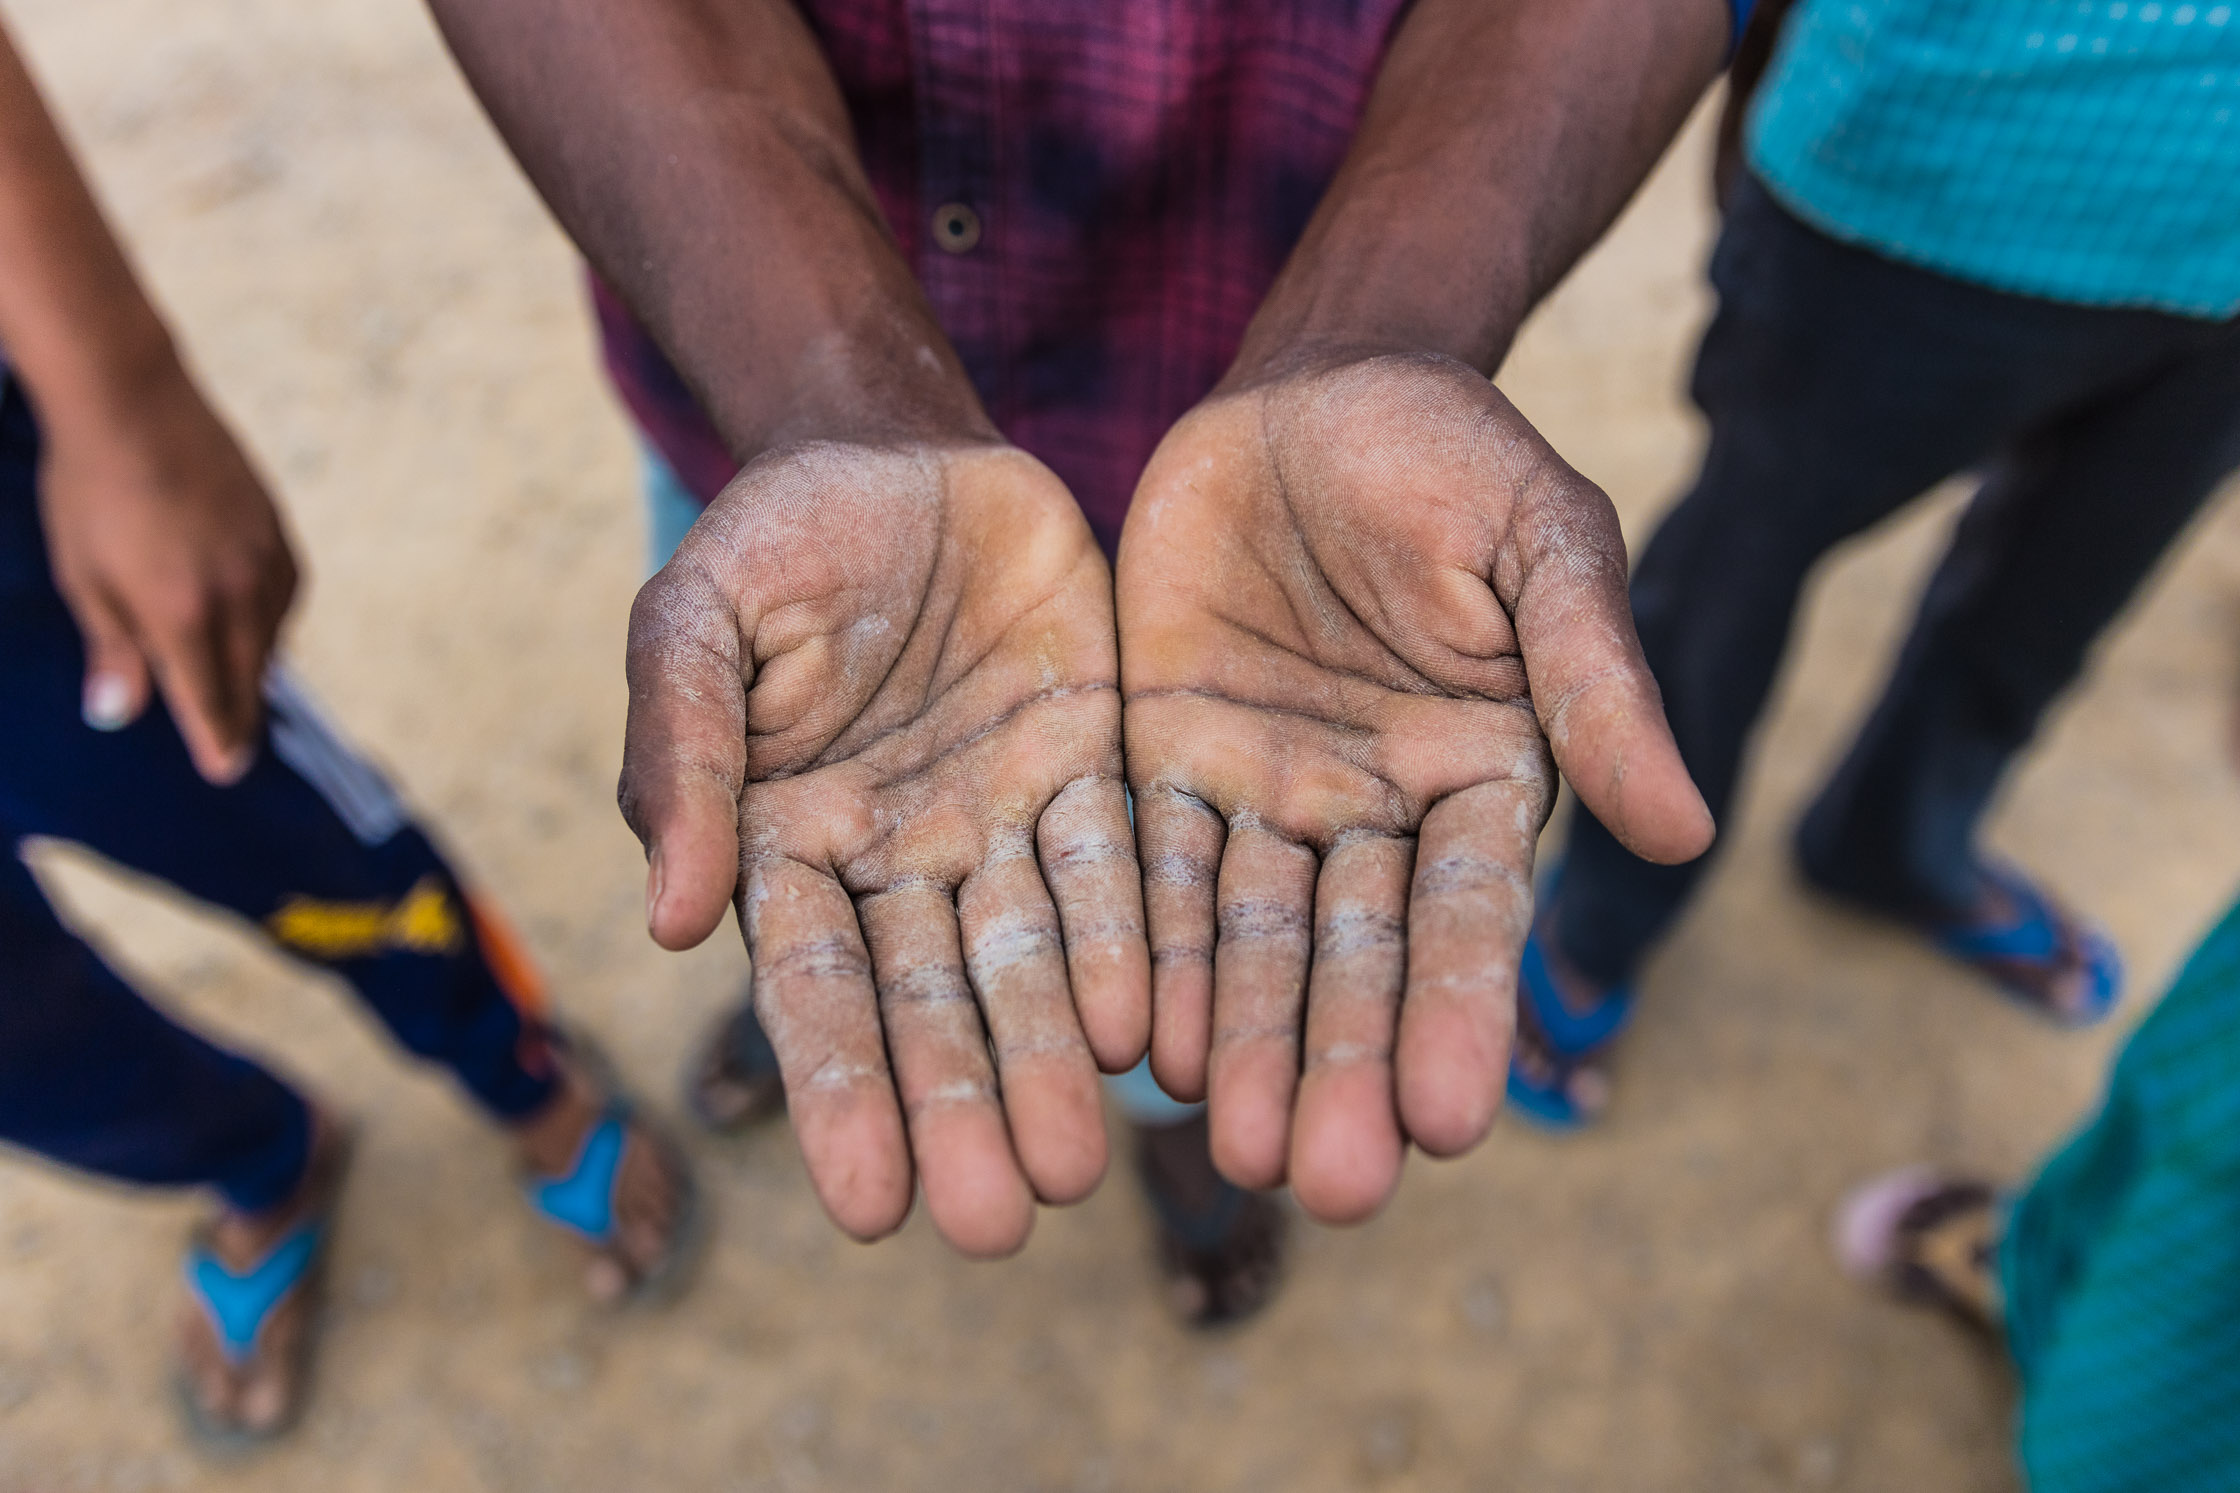 The hands of a stonecutter from Warangal, Telangana. Photo credit: Toby Smith.